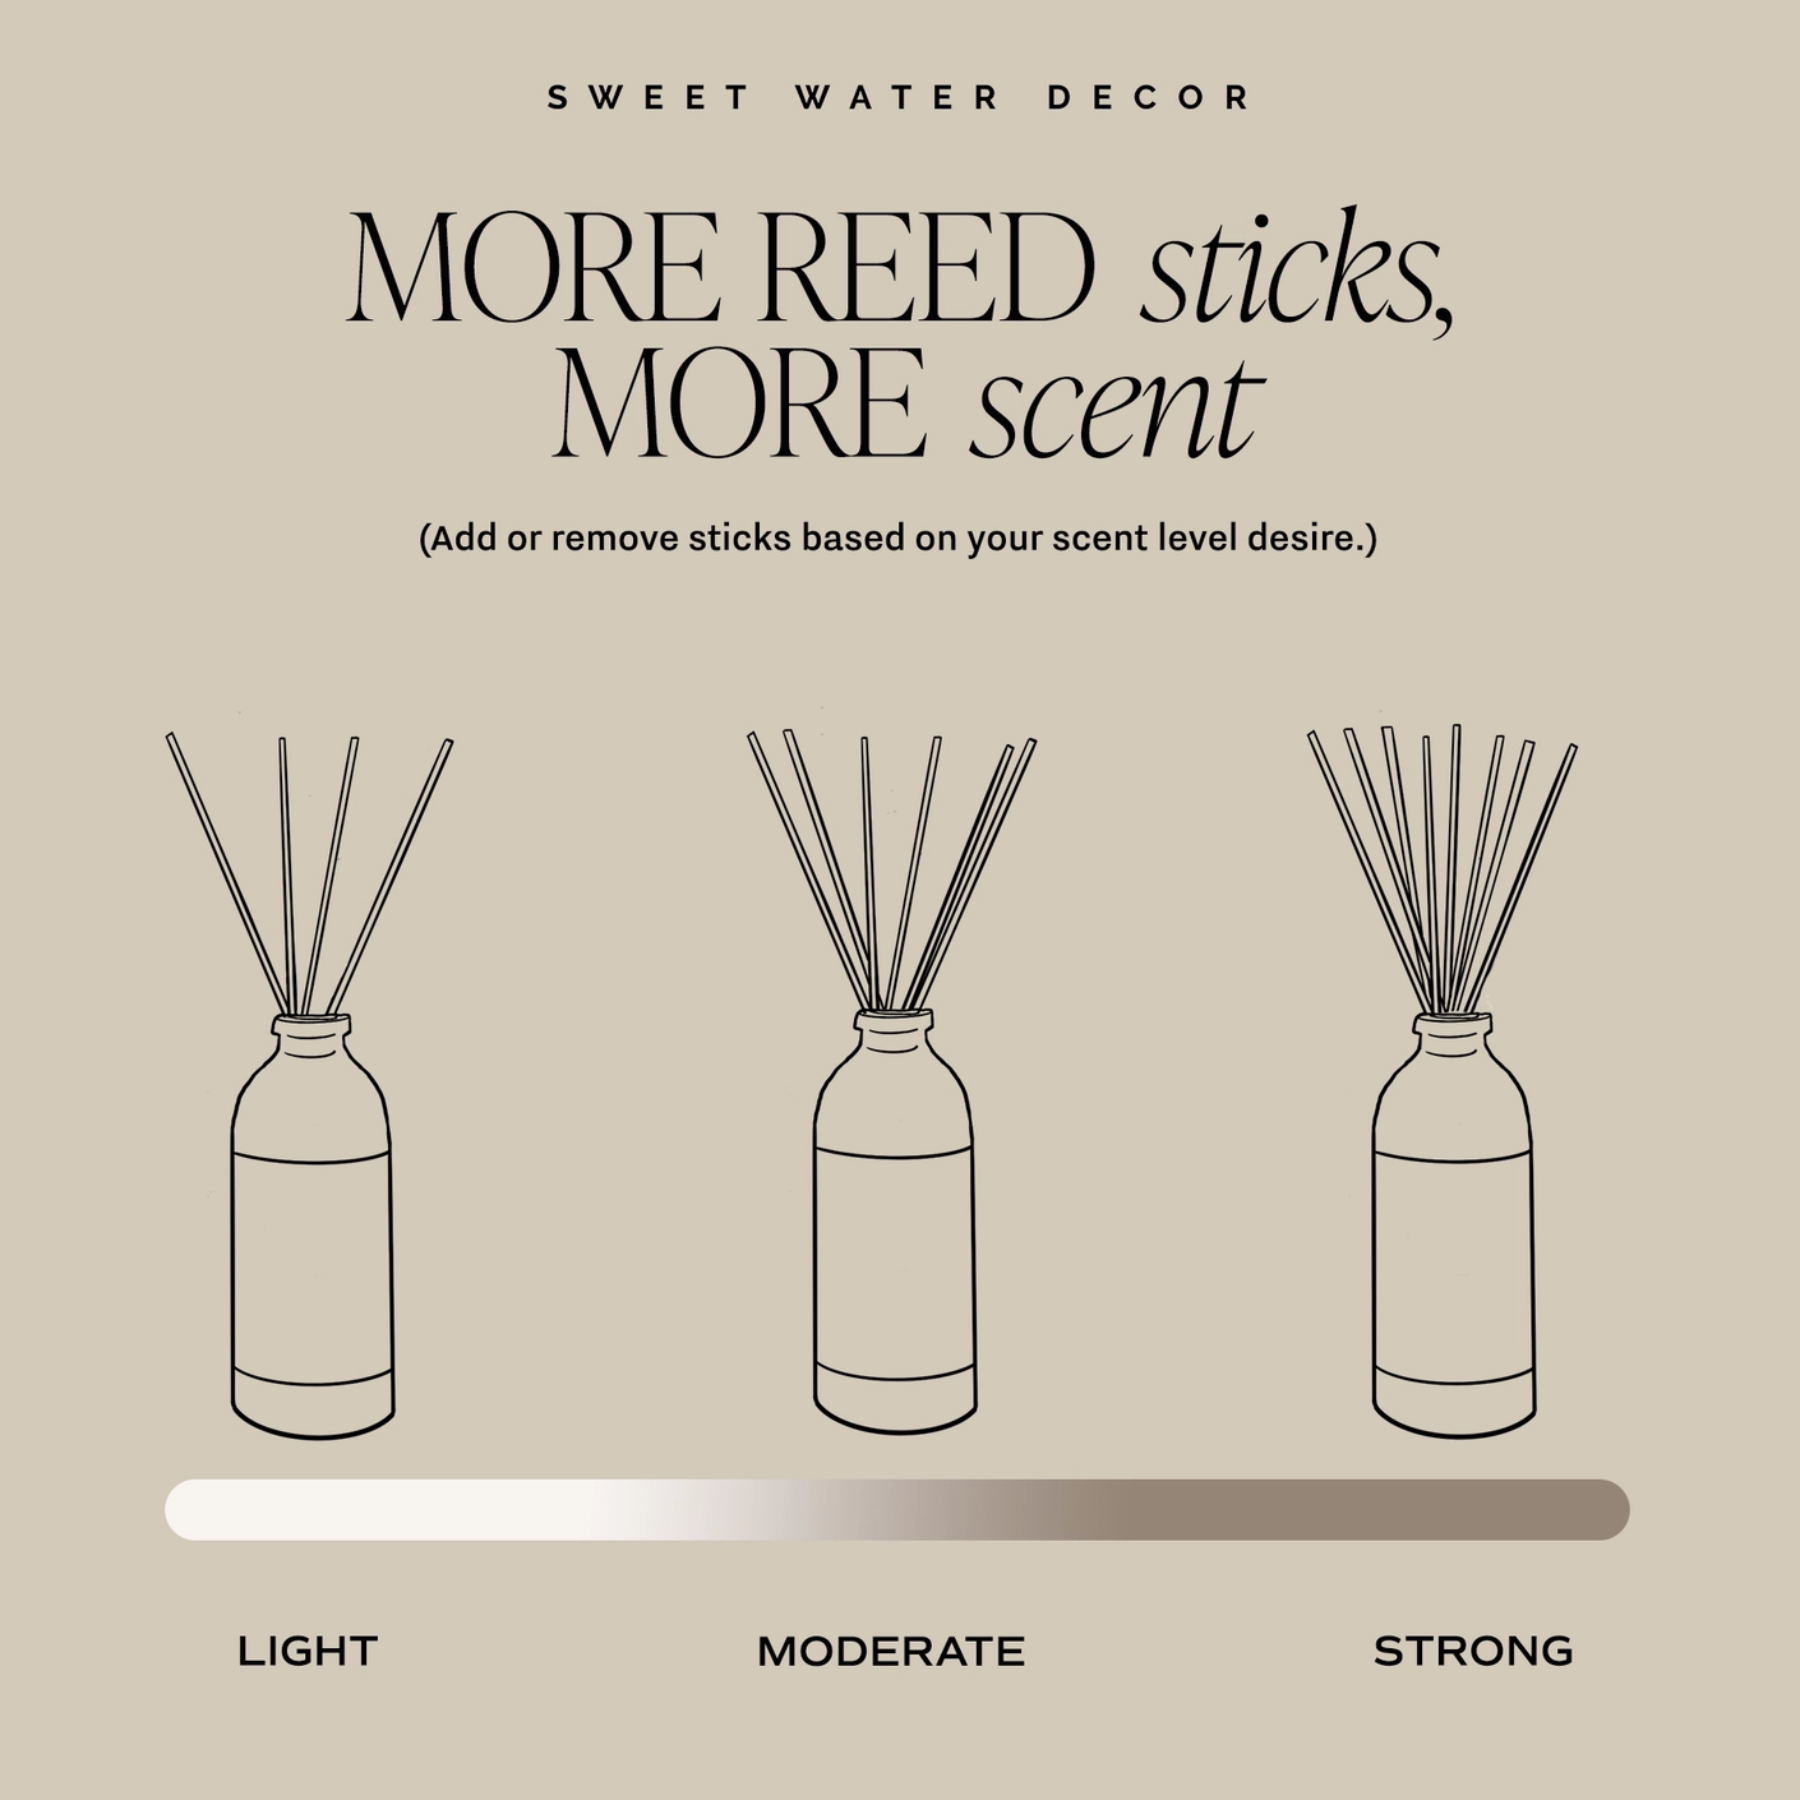 Mango + Coconut Reed Diffuser Instructions